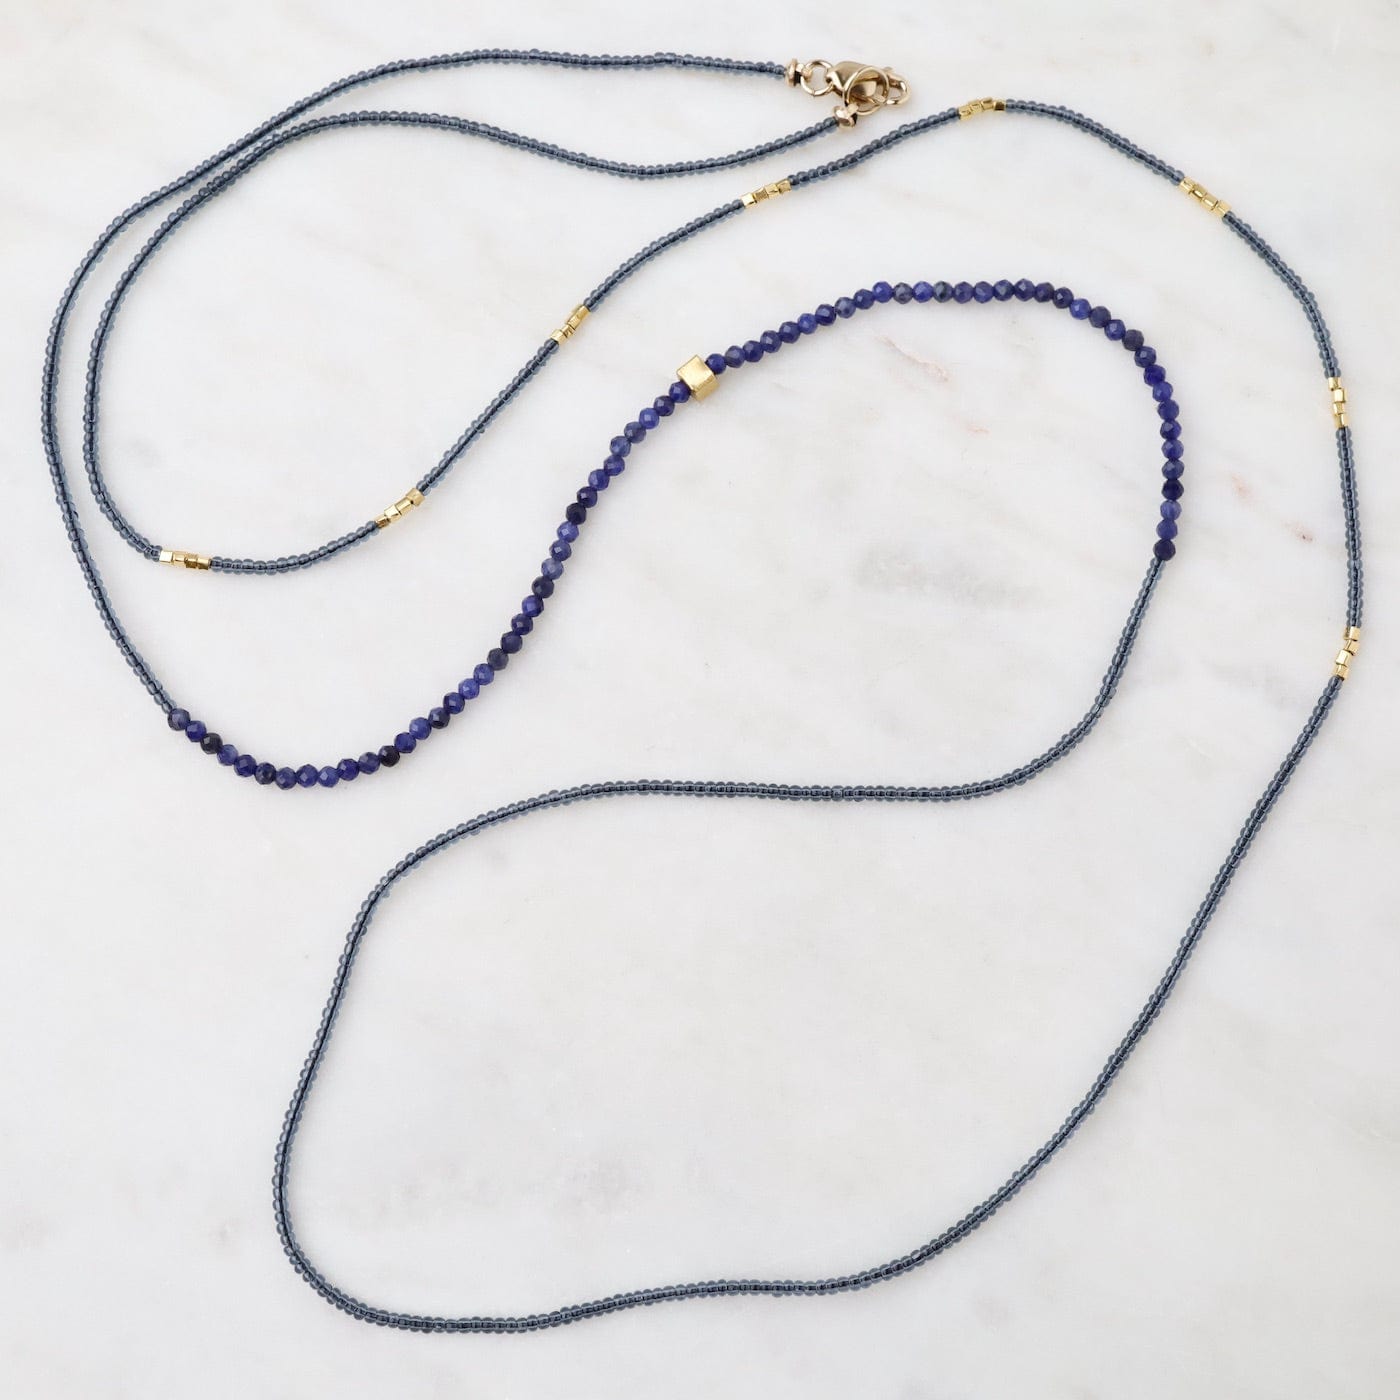 NKL Lapis Rondels & Grey Seed Bead Double Necklace